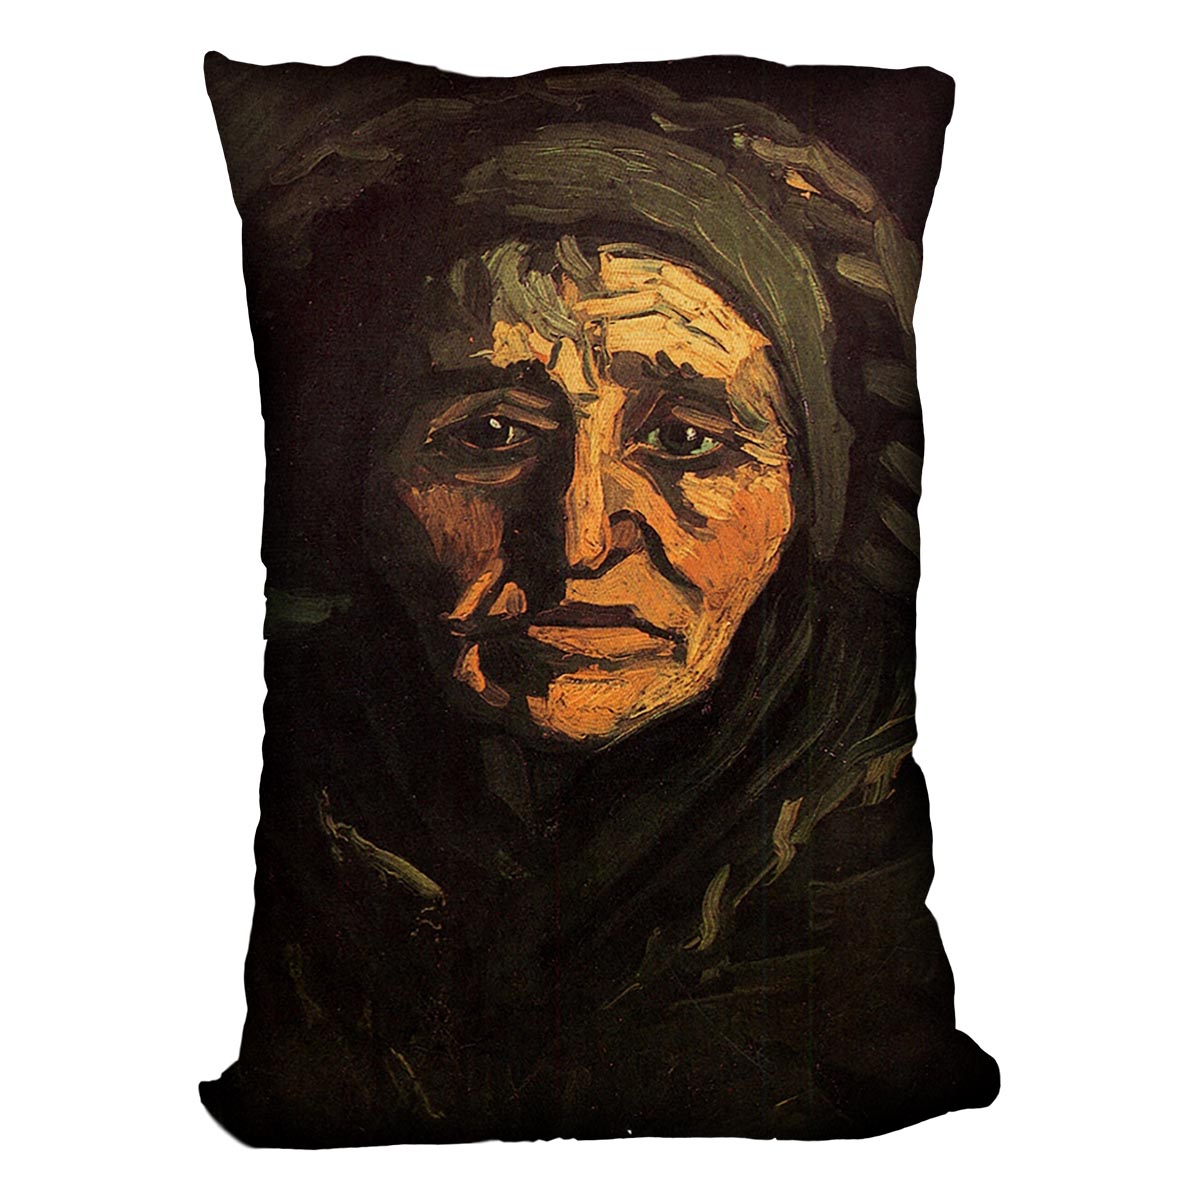 Head of a Peasant Woman with Greenish Lace Cap by Van Gogh Cushion